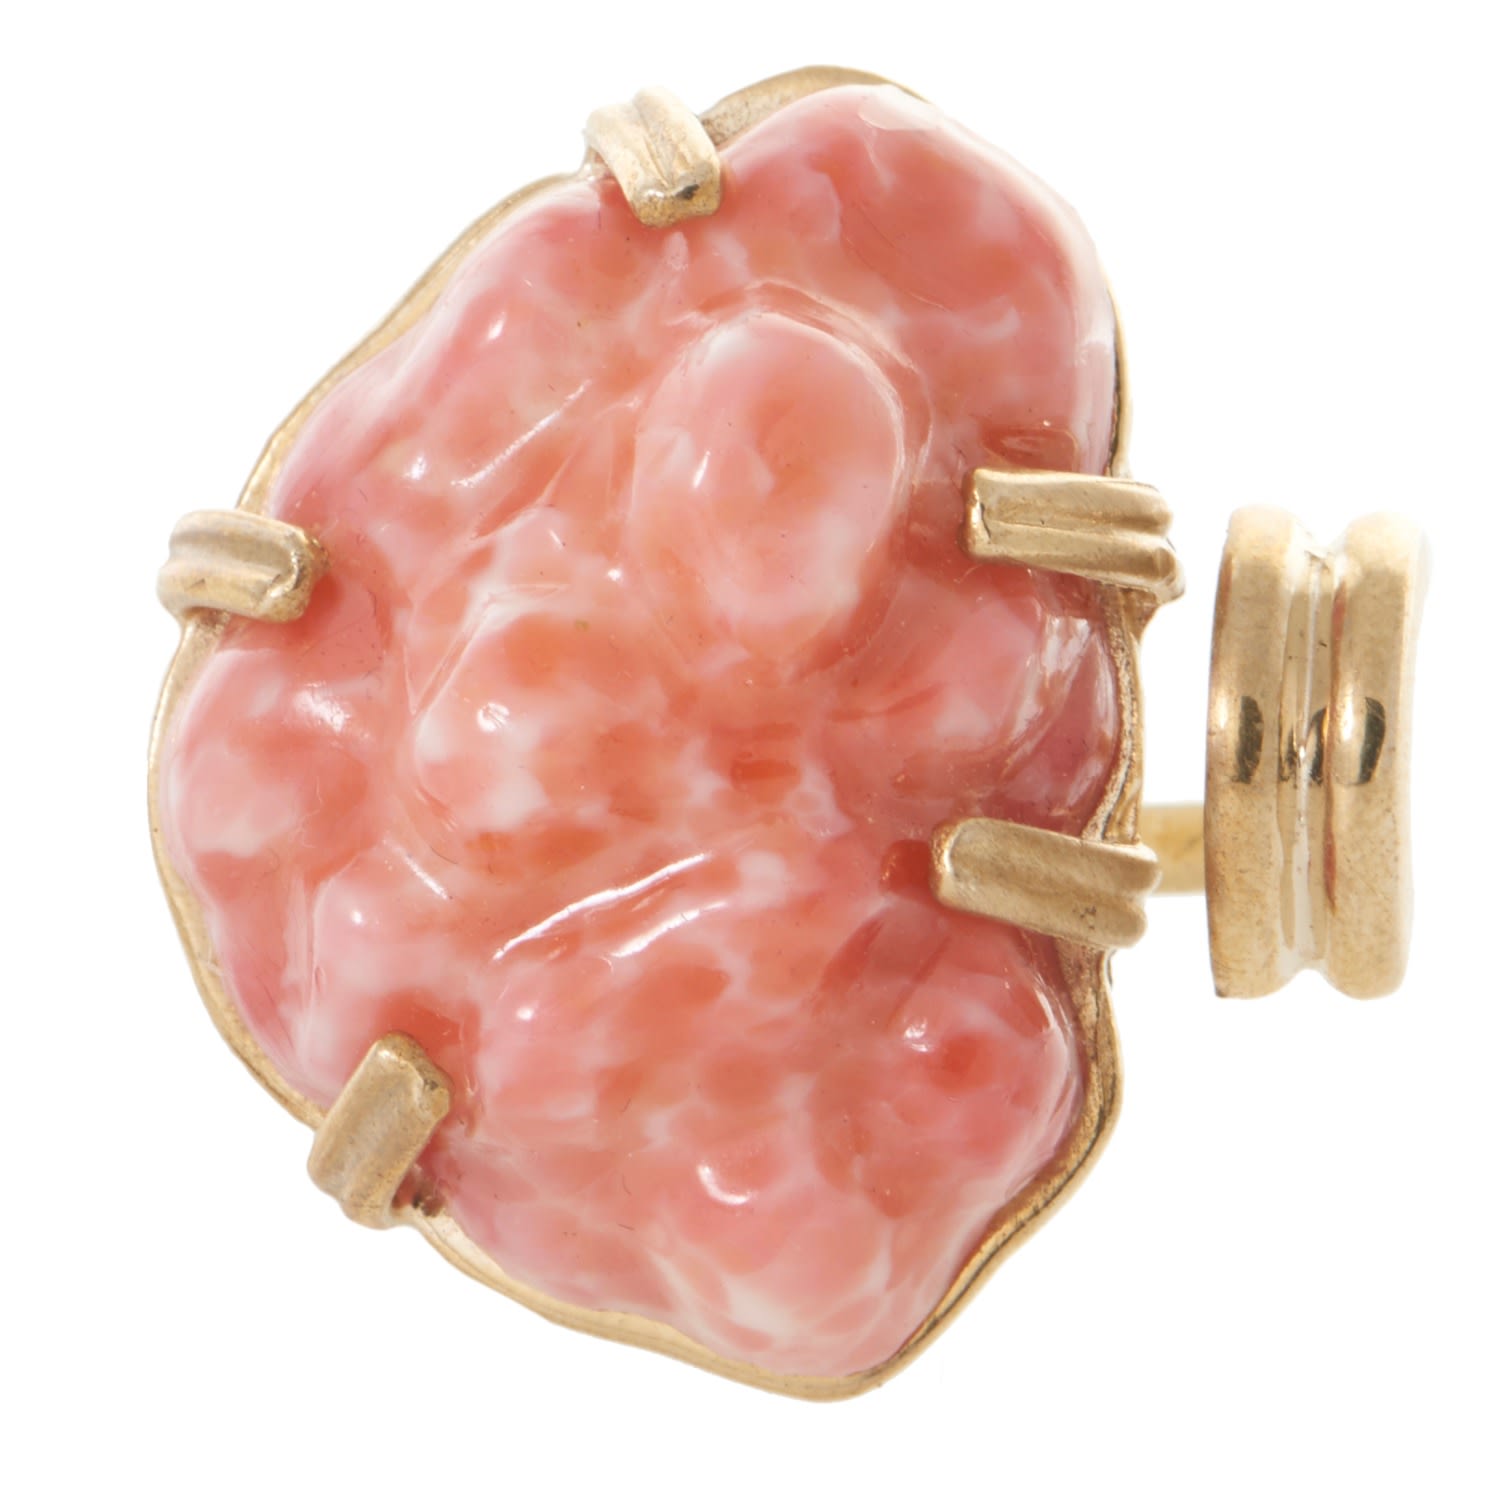 Castlecliff Women's Gold / Pink / Purple Peak Ring In Pink Coral